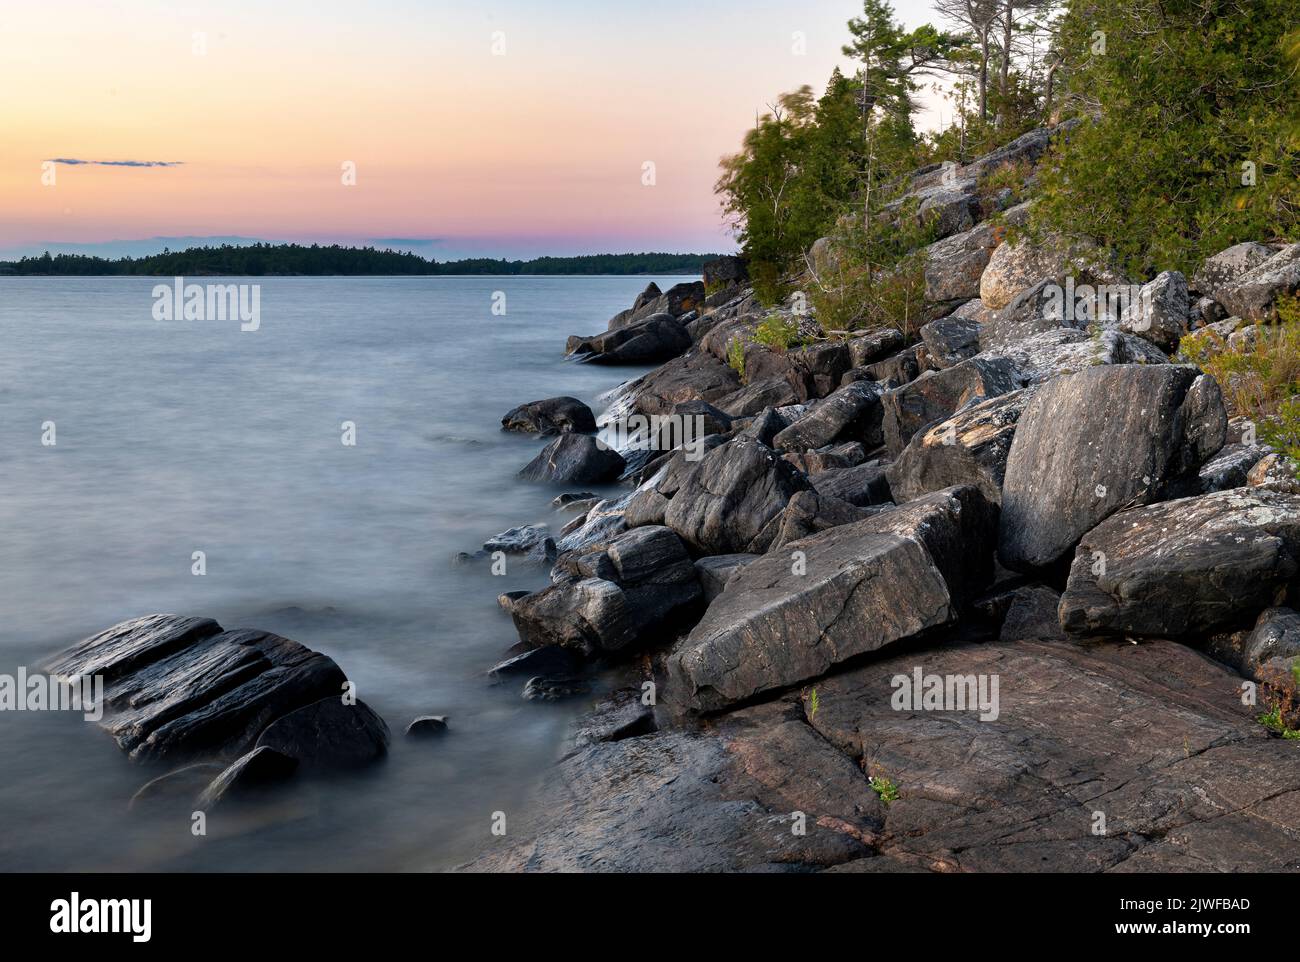 Shoreline of an island among the 30,000 island archipelago on the eastern side of the Georgian Bay in Ontario, Canada. Stock Photo